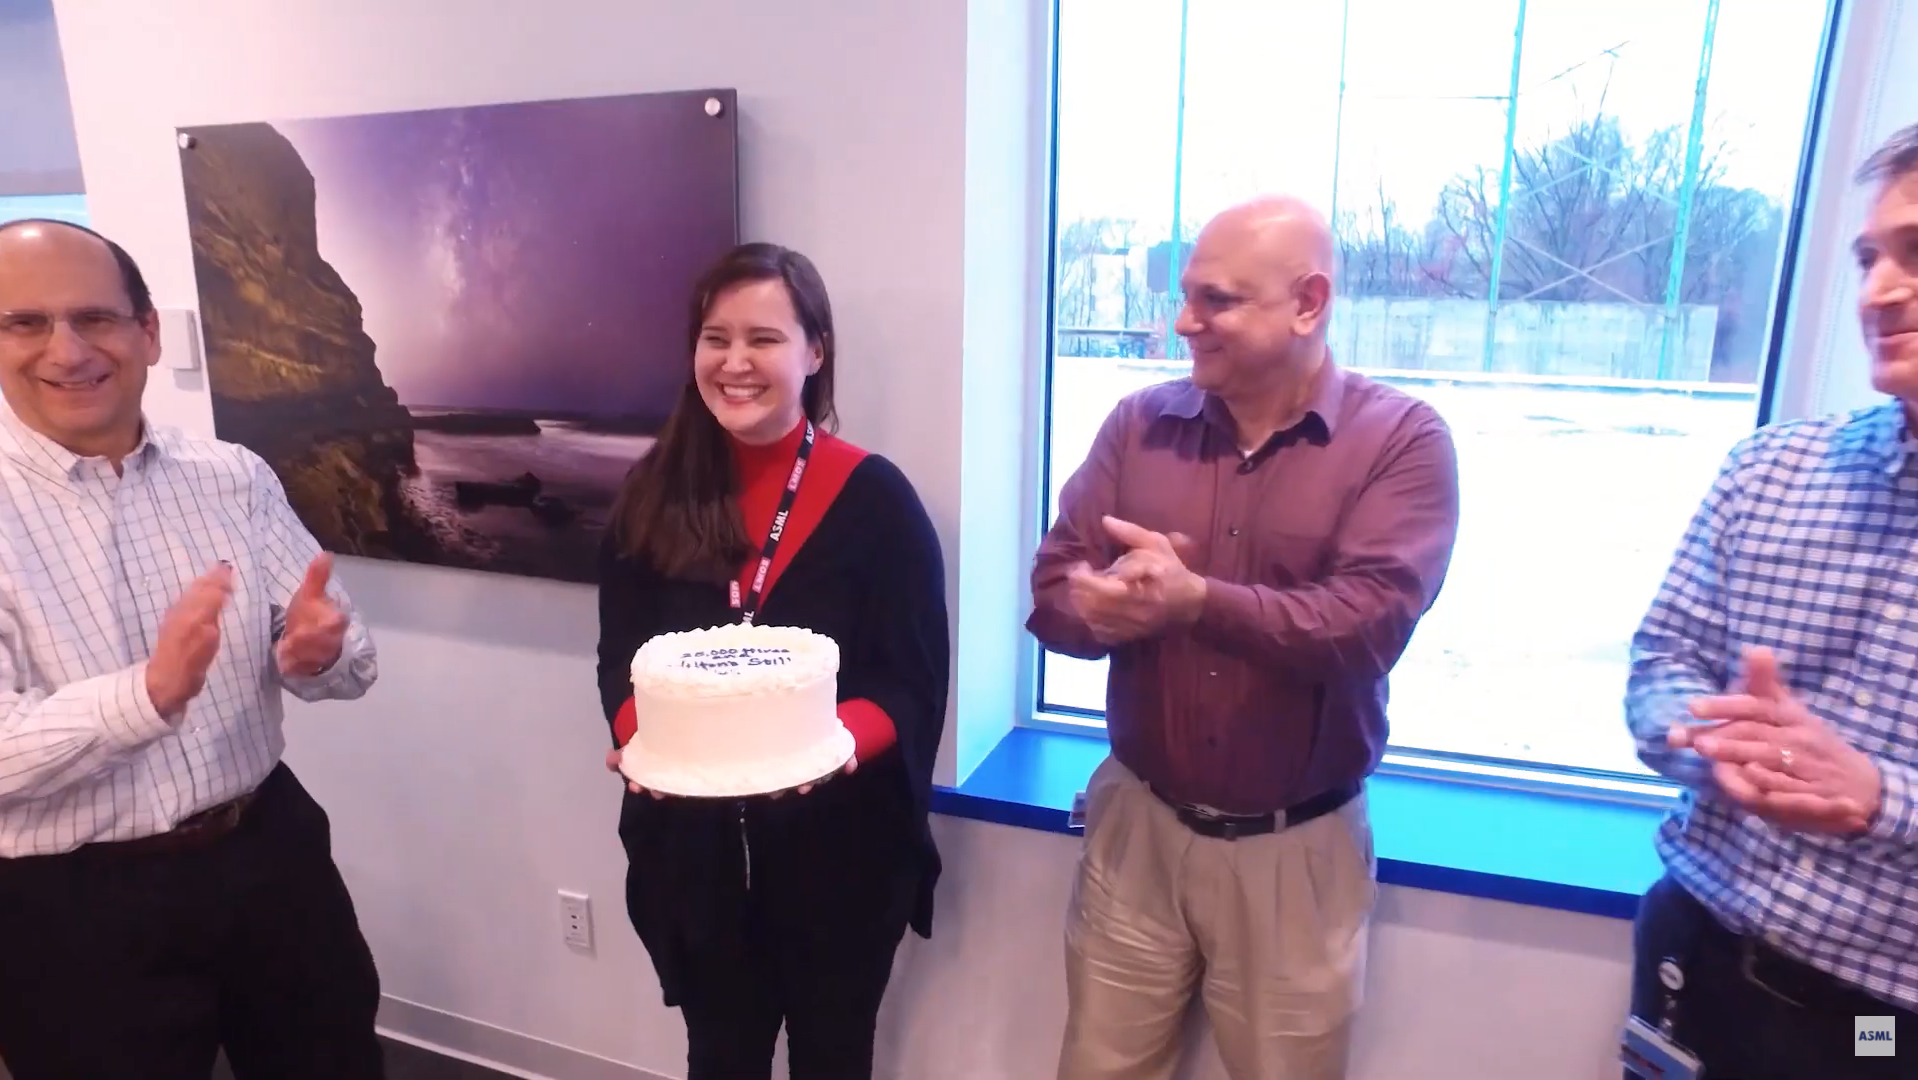 Oksana is welcomed as the 25,000th employee at ASML.